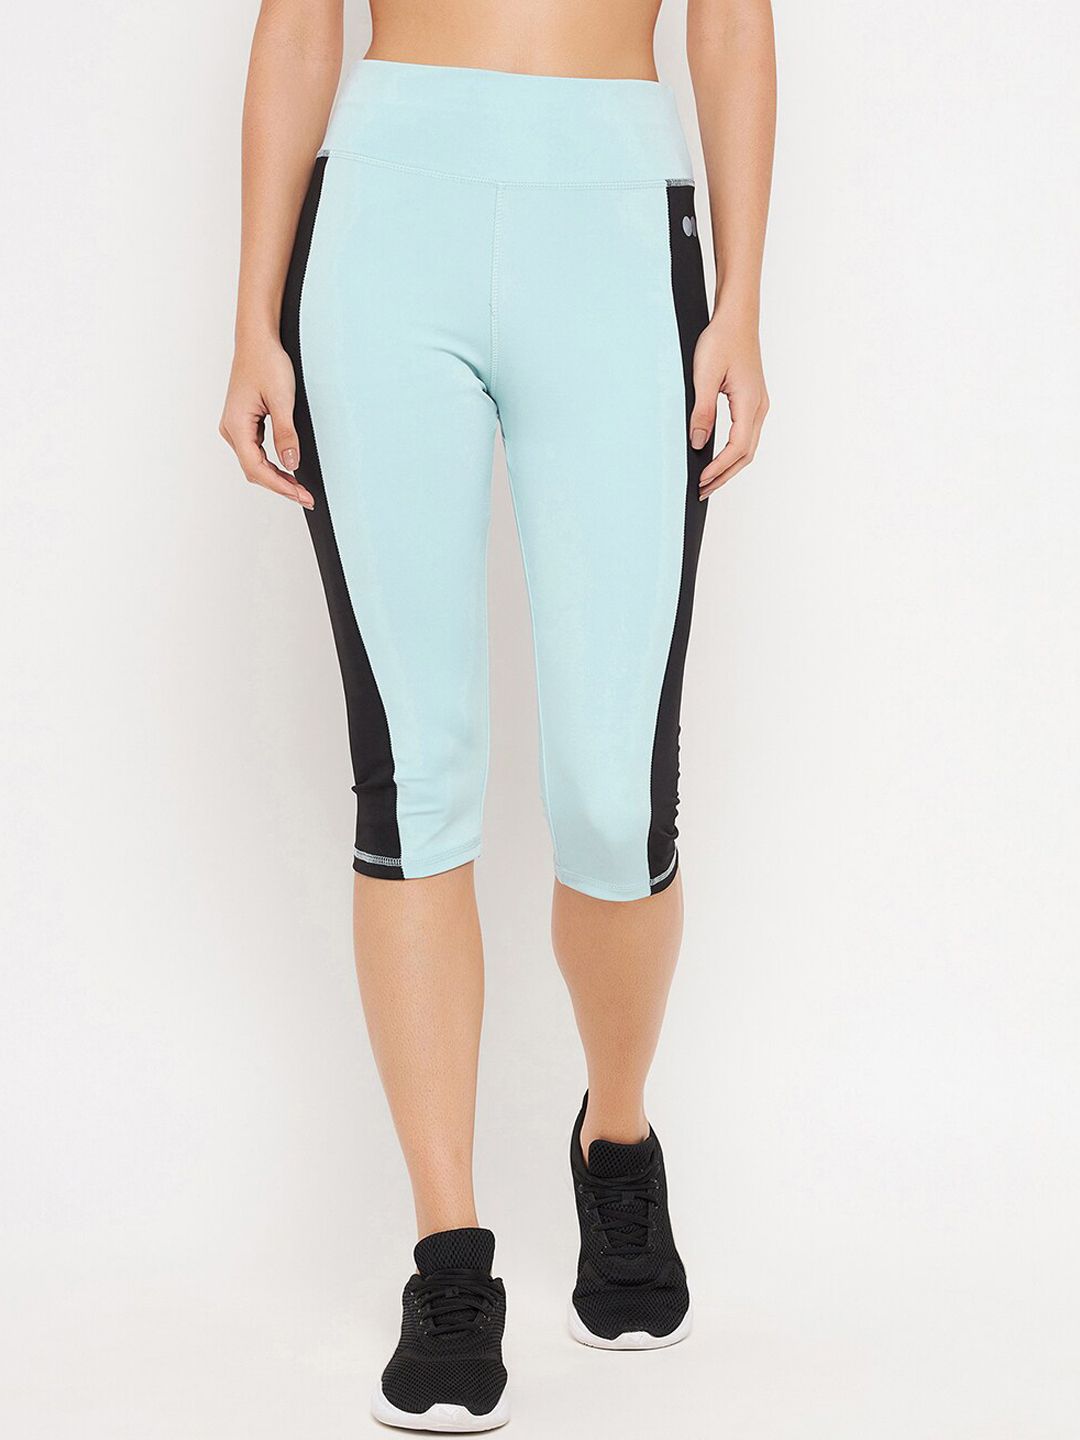 Clovia Women Blue Solid Three Quarter Length Training or Gym Tights Price in India